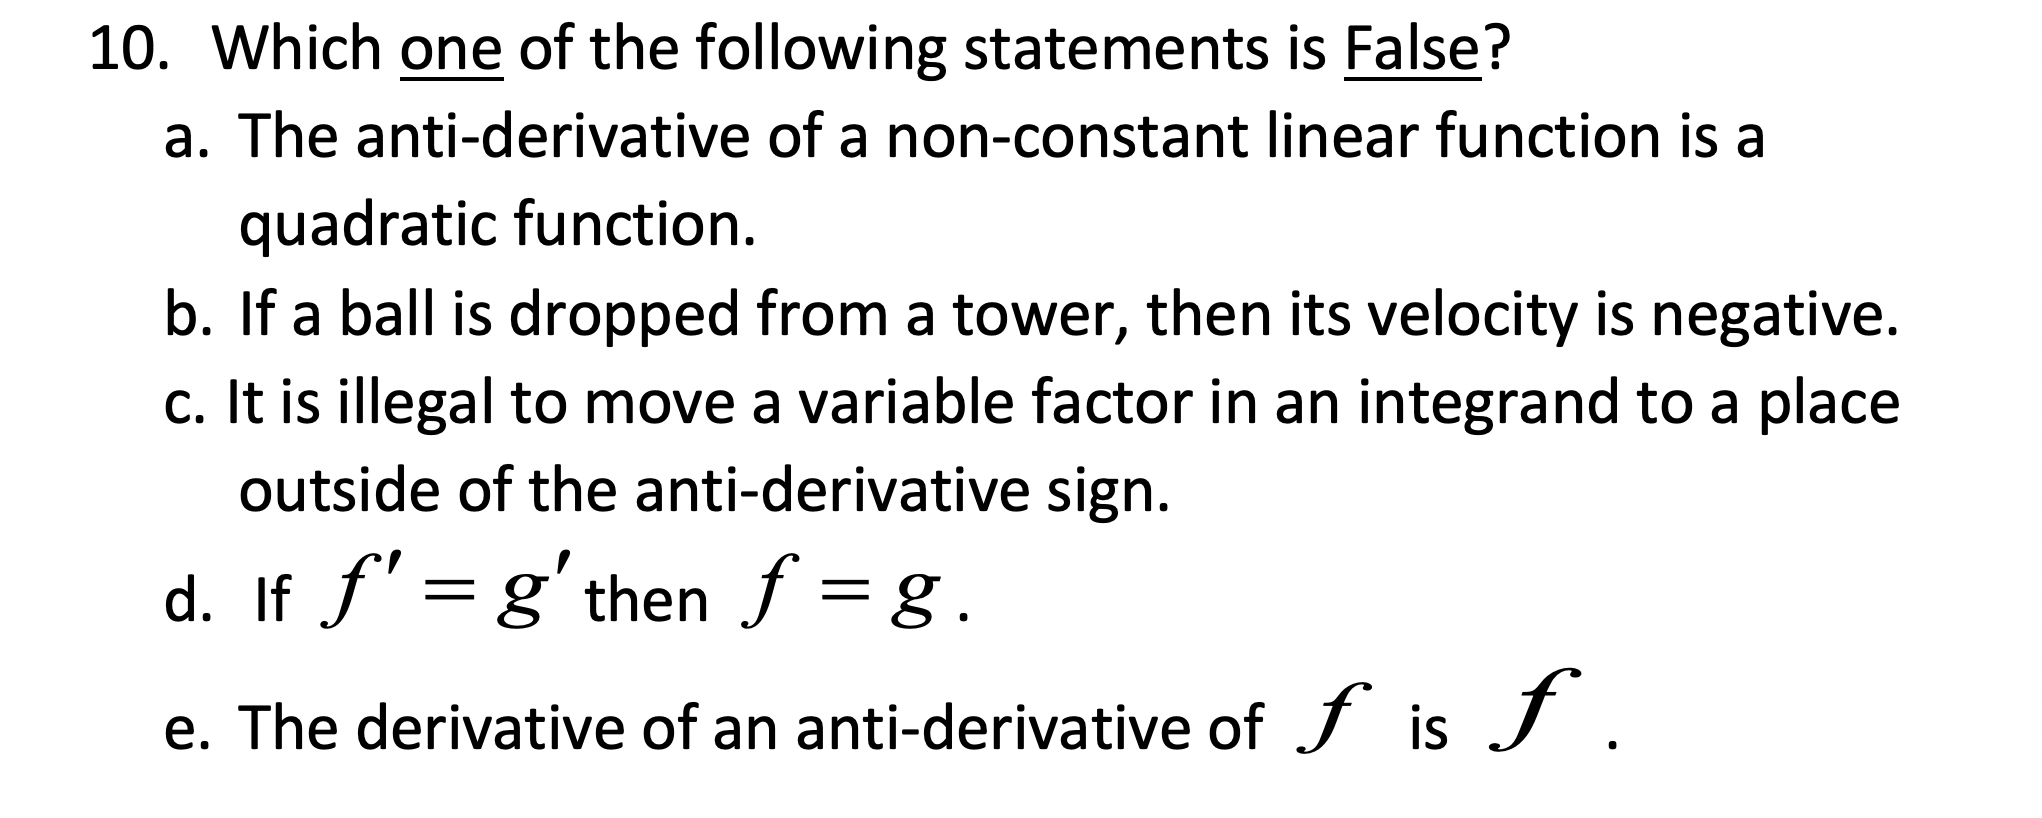 10. Which one of the following statements is False?
a. The anti-derivative of a non-constant linear function is a
quadratic function.
b. If a ball is dropped from a tower, then its velocity is negative.
c. It is illegal to move a variable factor in an integrand to a place
outside of the anti-derivative sign.
d. If ƒ' = g'then f = g.
e. The derivative of an anti-derivative of f is J .
